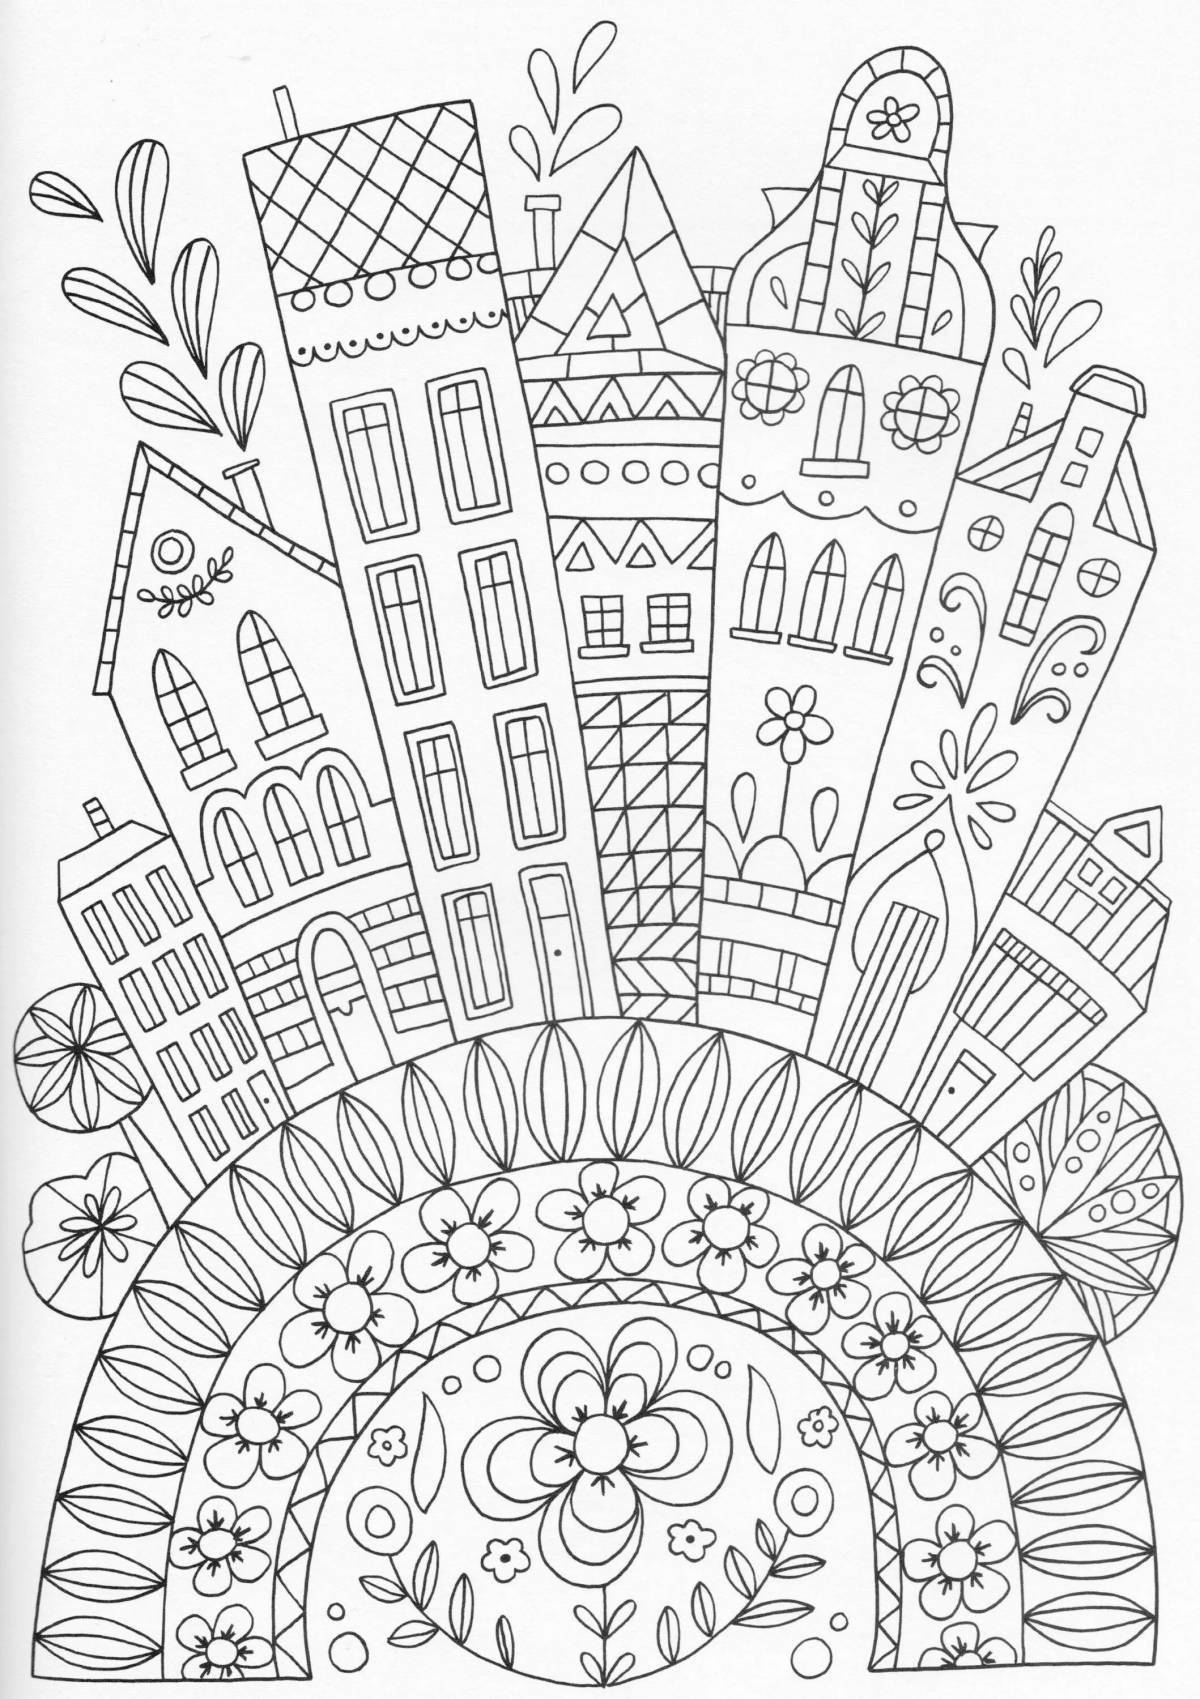 Amazing unusual coloring book for kids